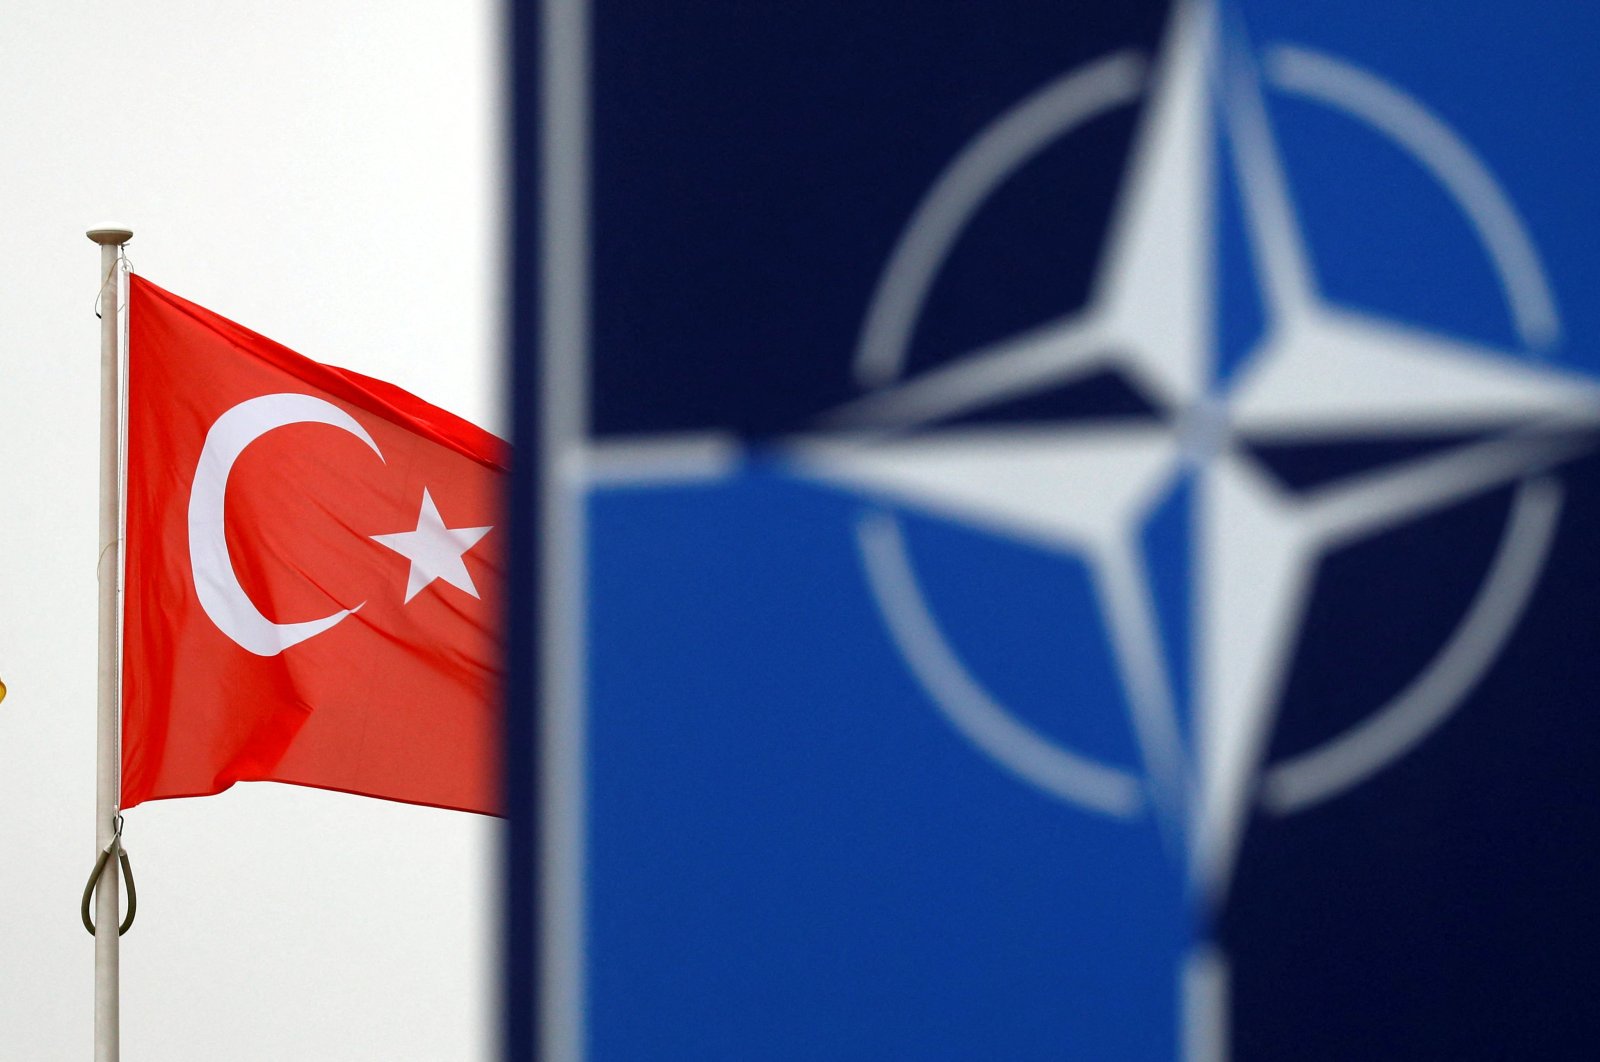 A Turkish flag flies in the backdrop of a NATO logo at the Alliance headquarters in Brussels, Belgium, Nov. 26, 2019. (Reuters File Photo)